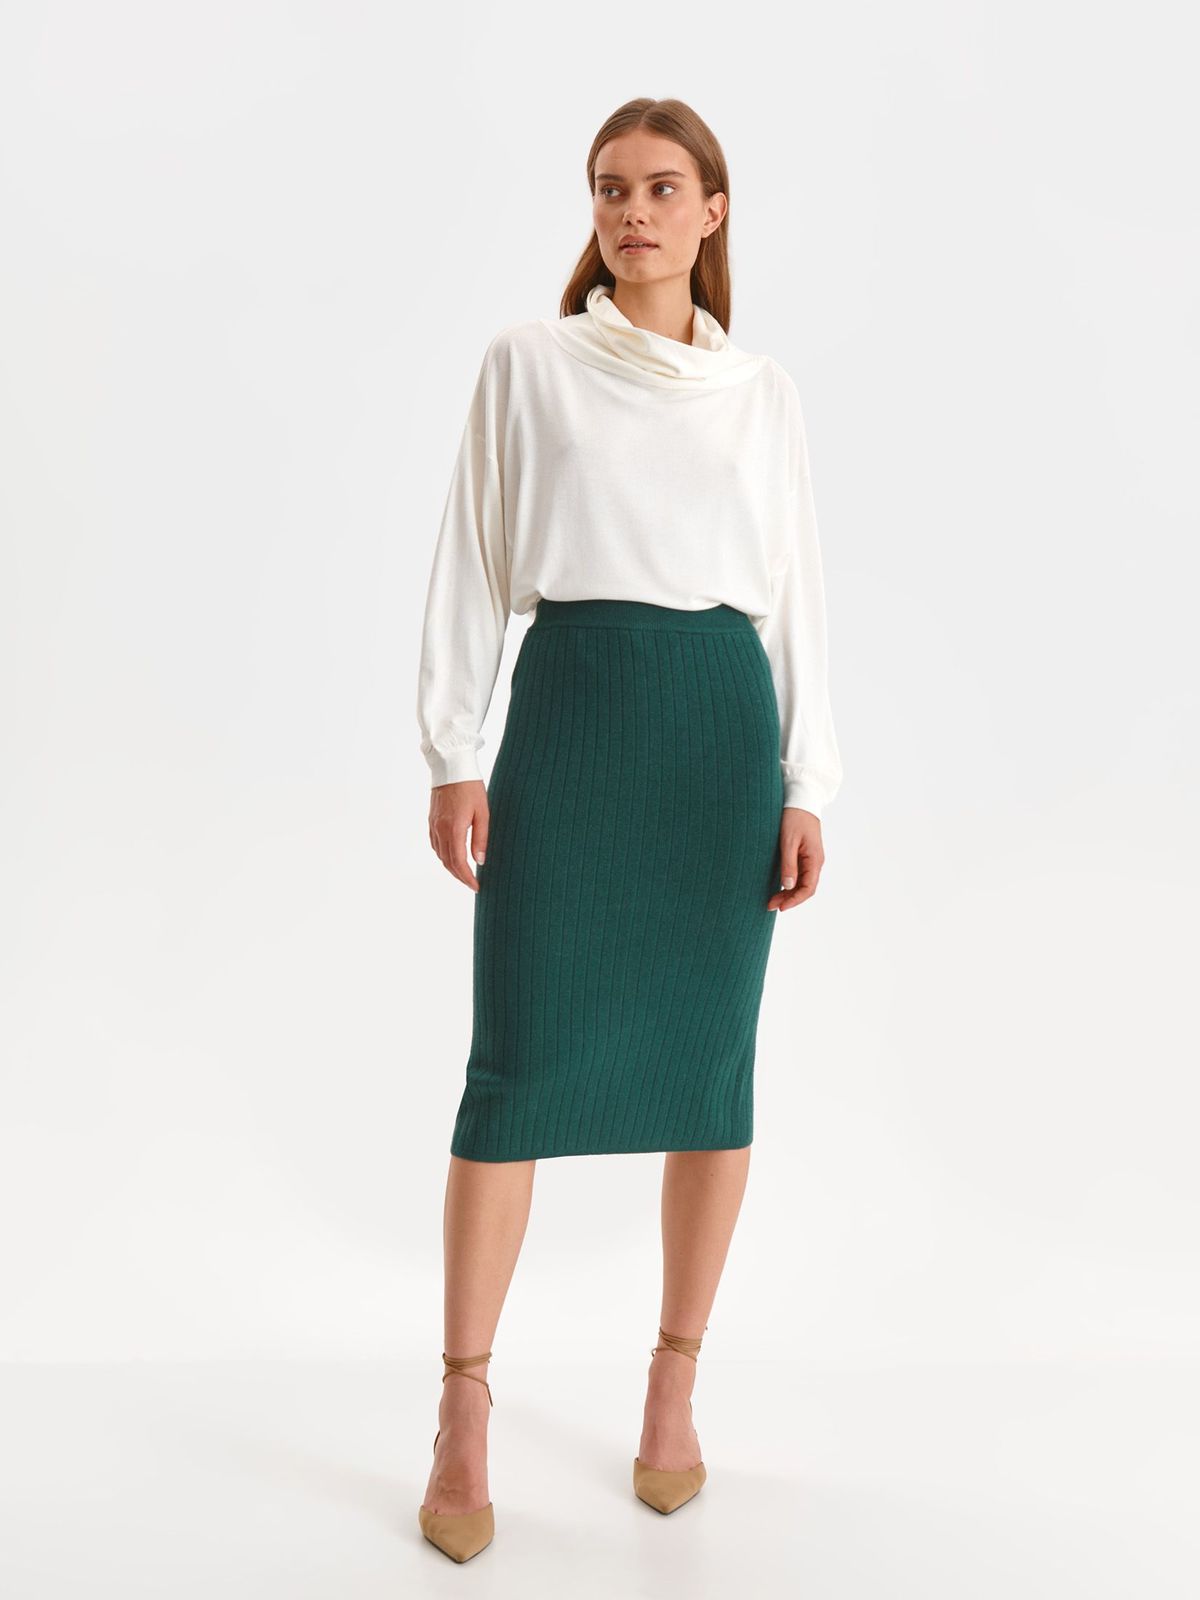 Green skirt knitted pleated pencil